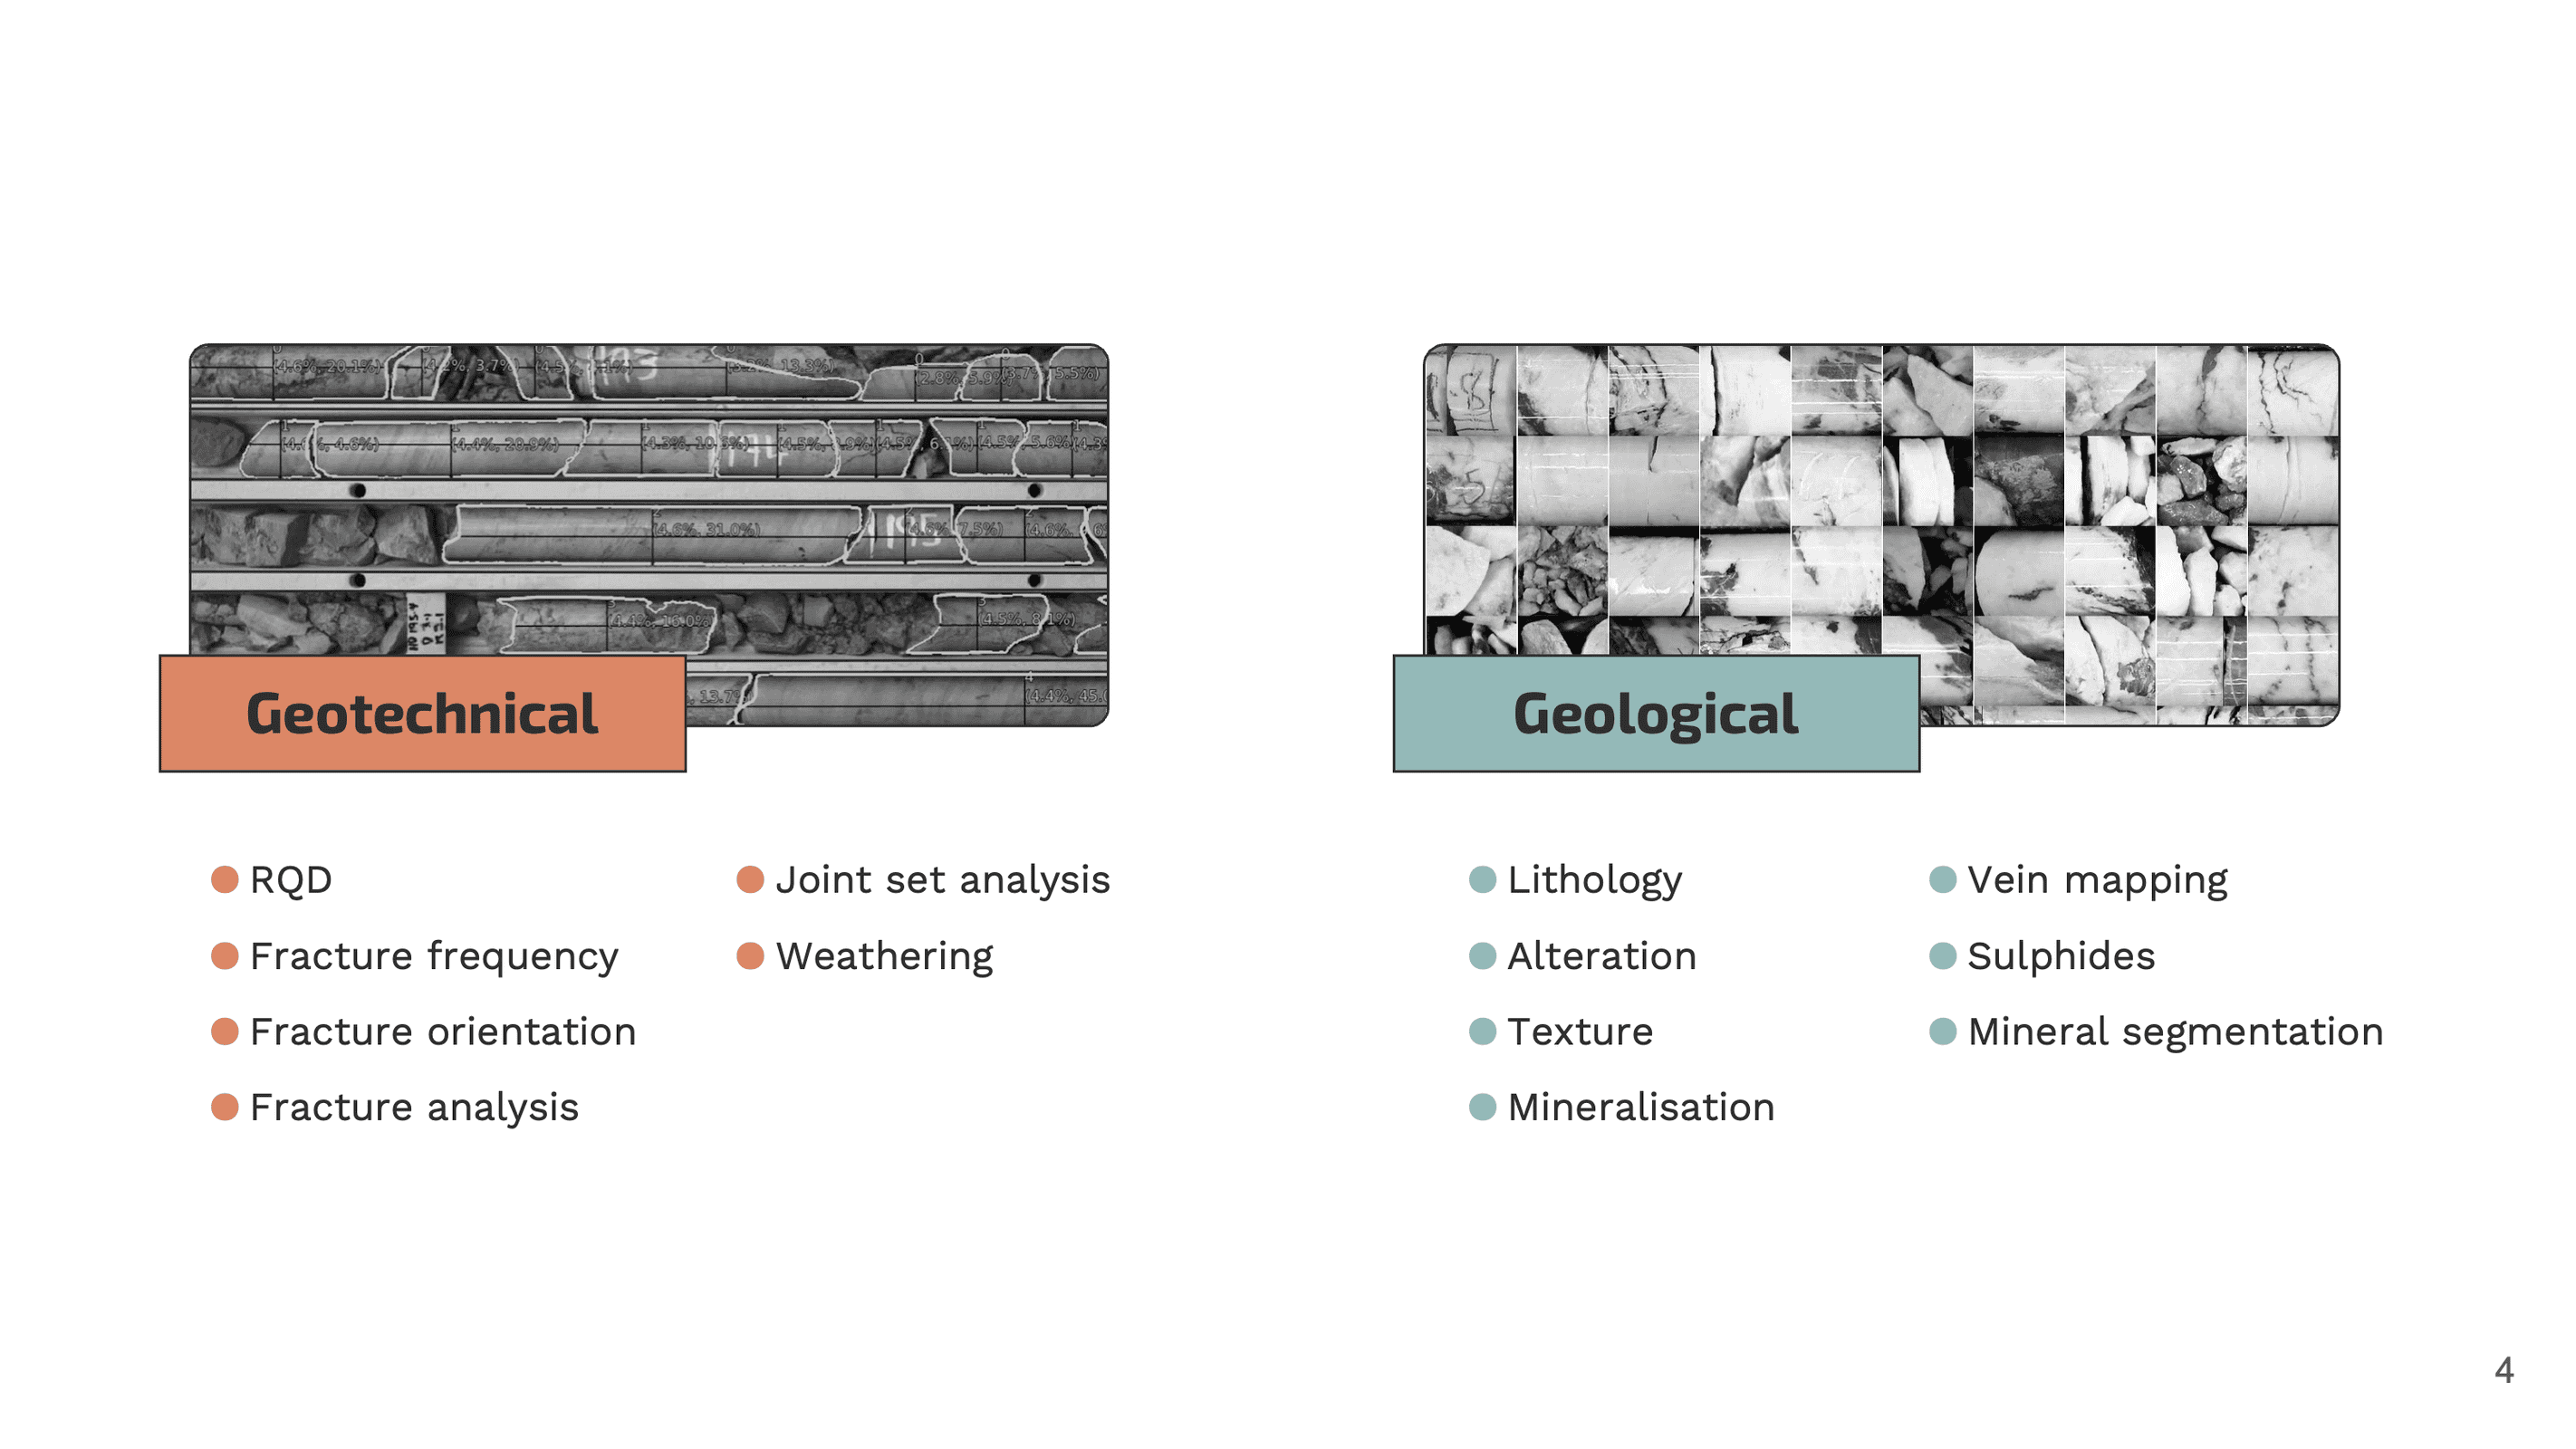 The key types of geological and geotechnical data that can be generated from core imagery as part of the Datarock platform